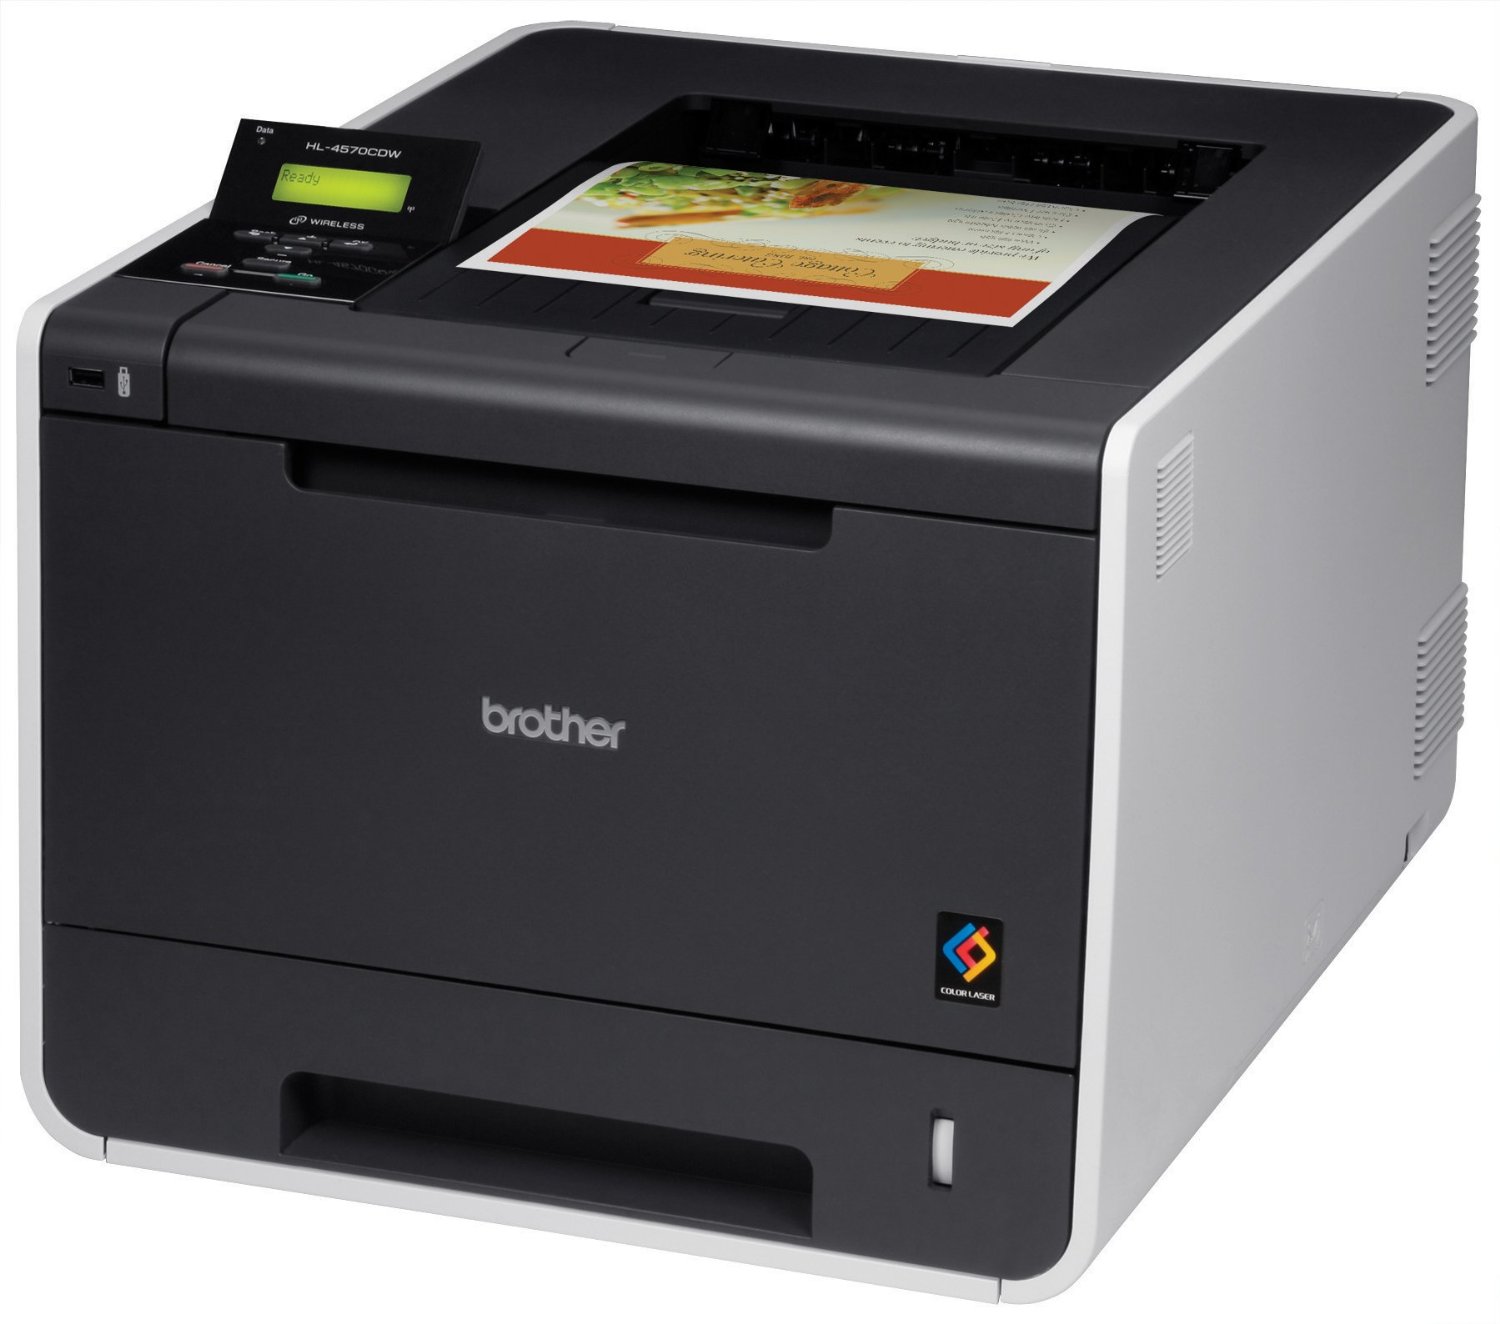 Brother HL4570CDW Color Laser Printer with Wireless Networking and Duplex-sale-01